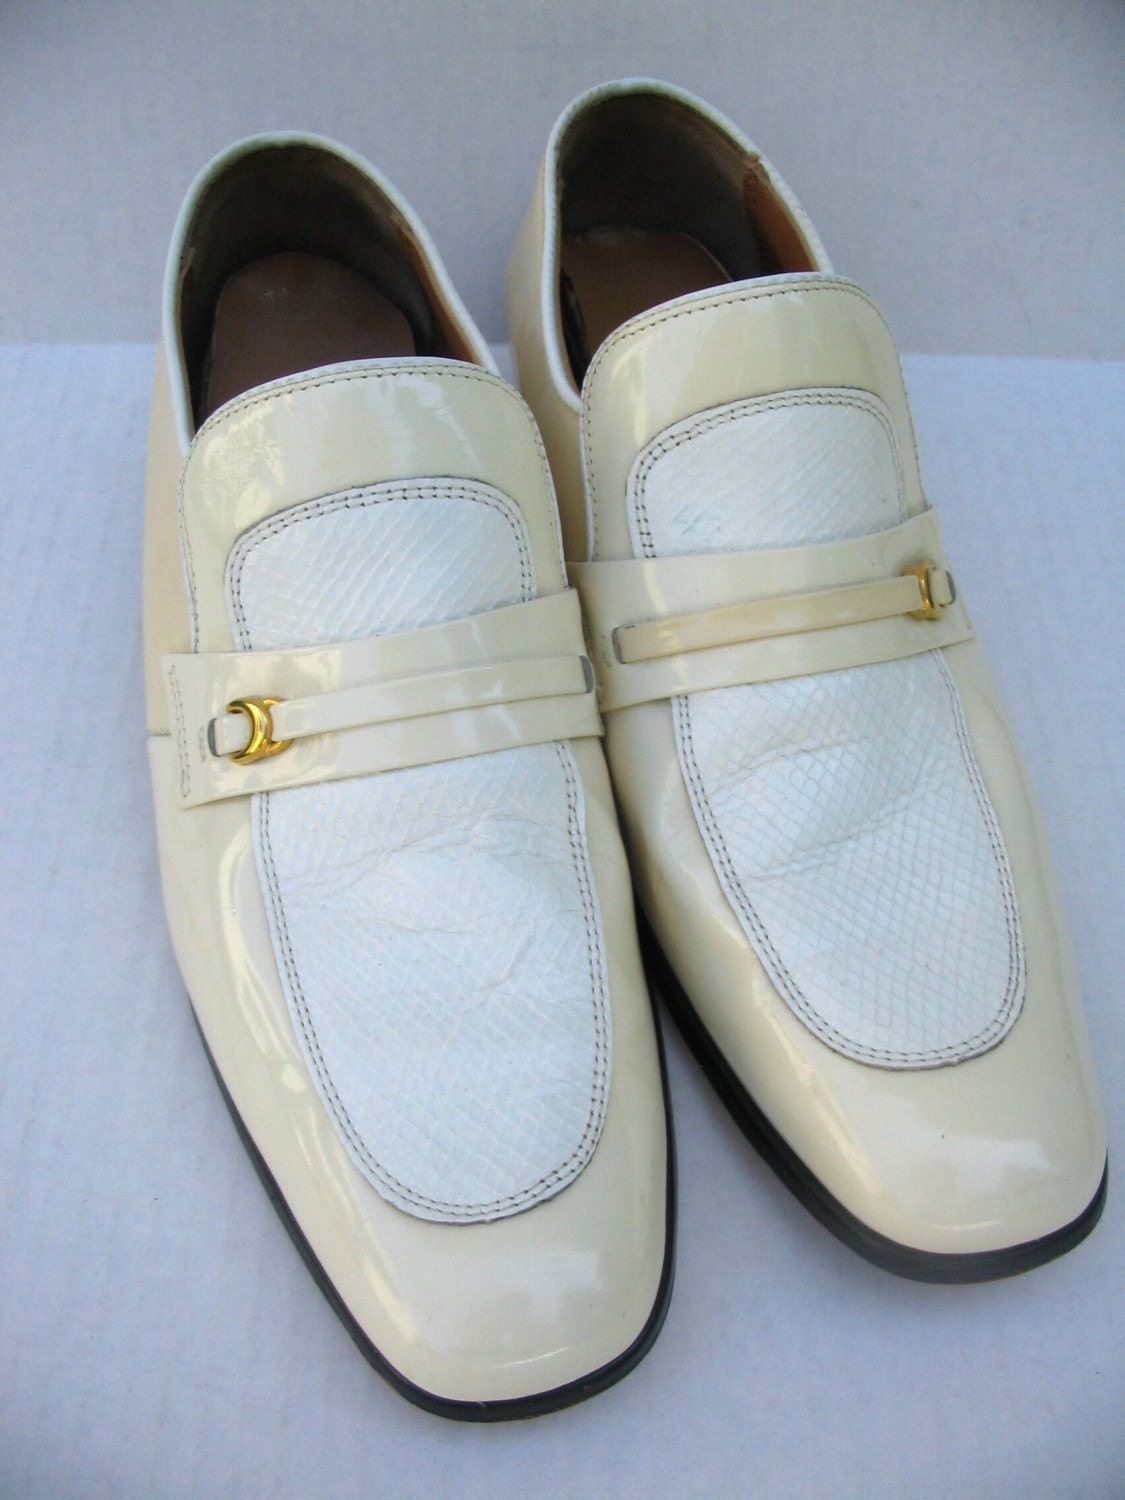 Mens Creamy White Patent Leather 70s Loafer Dress Shoes 11.5